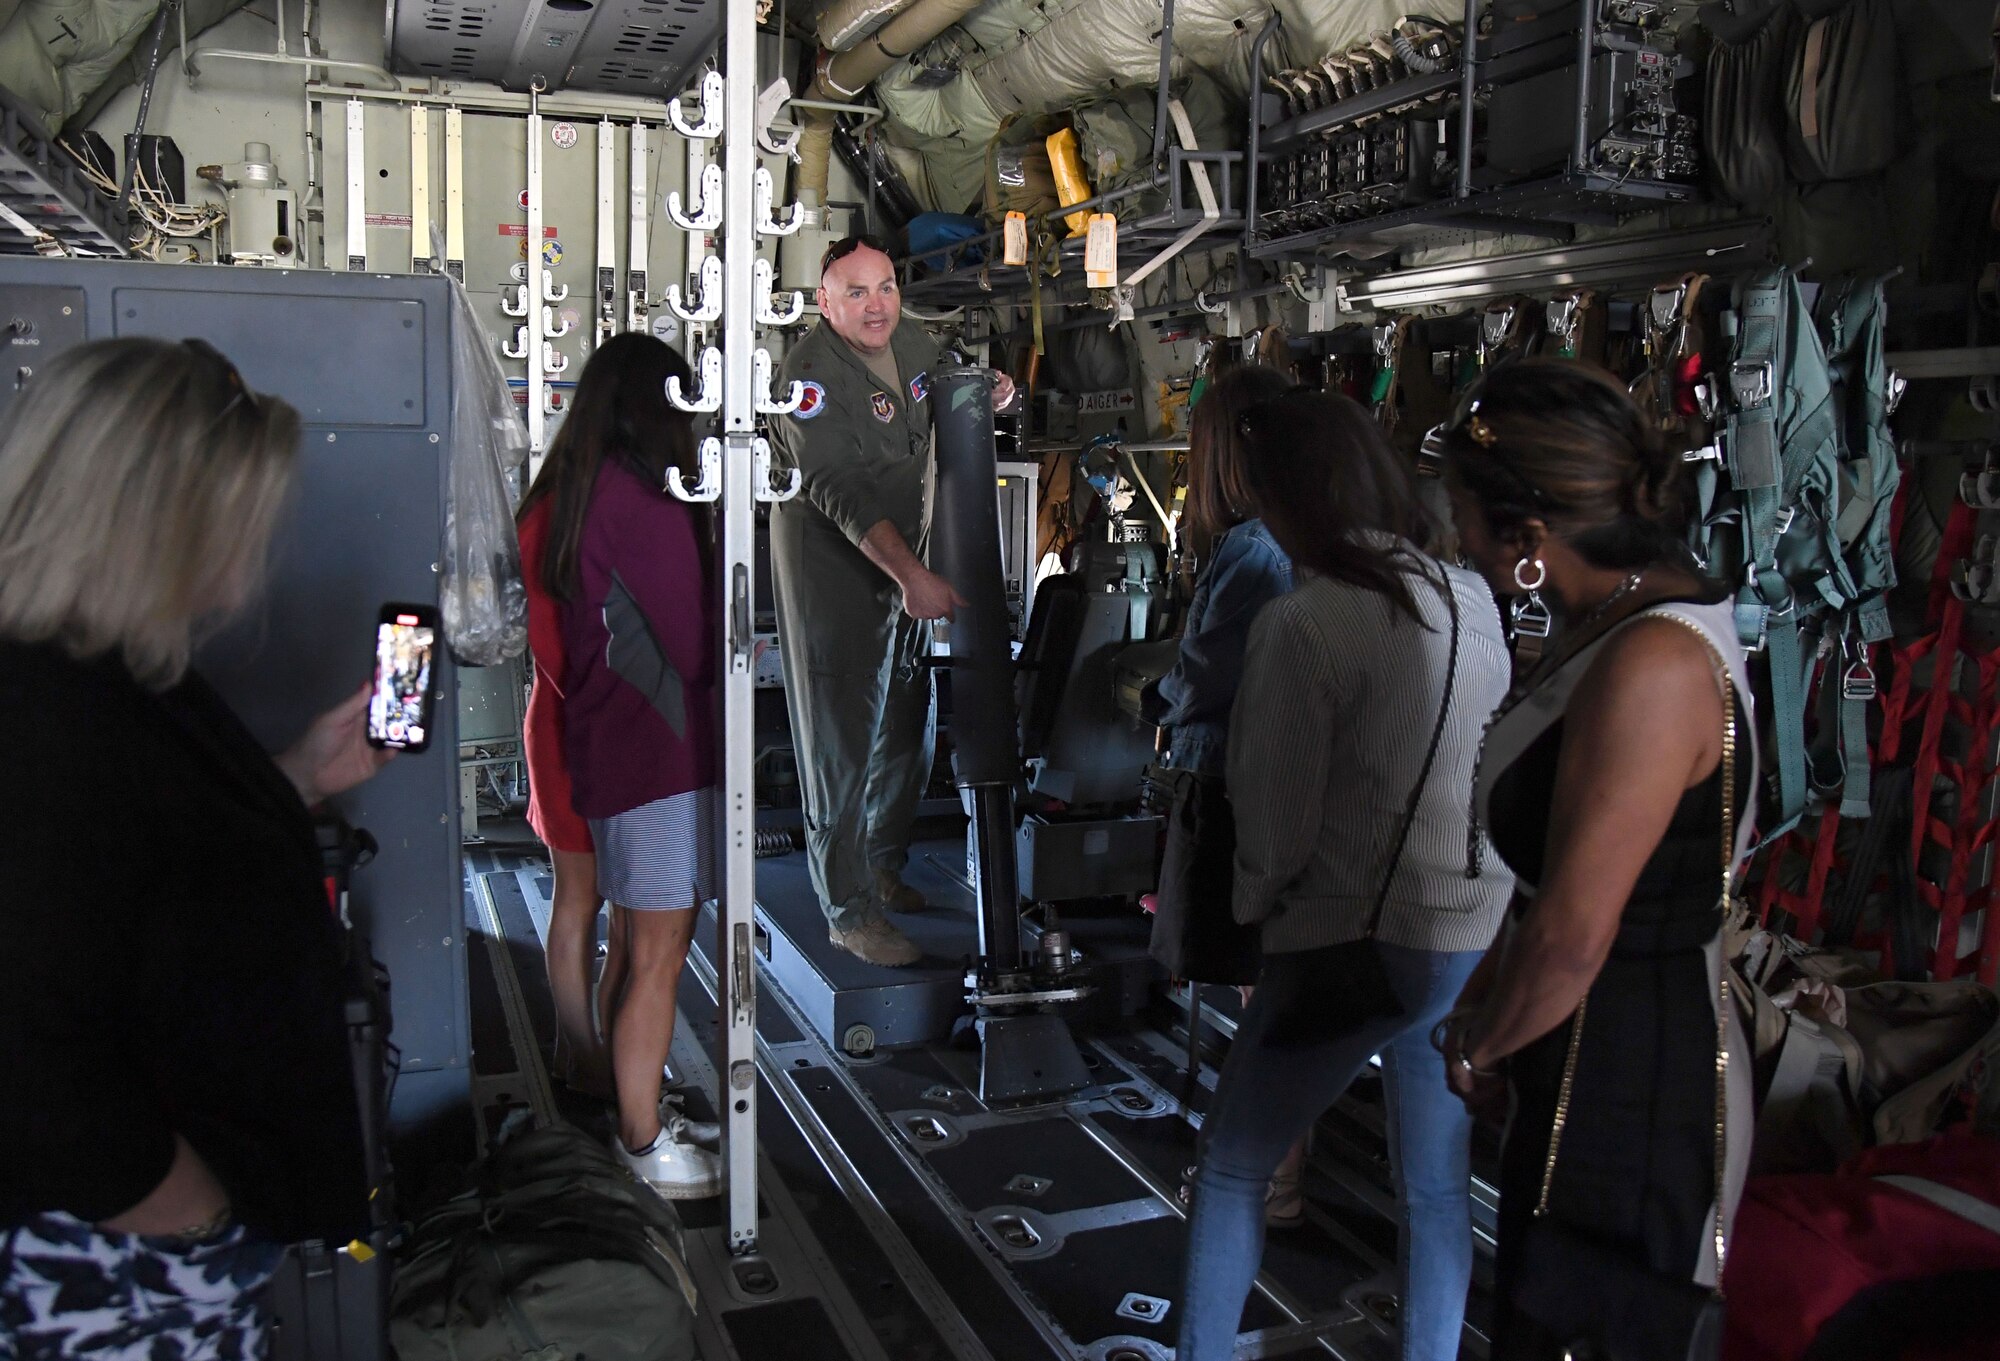 U.S. Air Force Maj. Kendall Dunn, 53rd Weather Reconnaissance Squadron instructor pilot, provides a tour of a C-130 aircraft for Rapiscan Systems Classic guests at Keesler Air Force Base, Mississippi, March 31, 2022. The tour also included a military working dog demonstration and a tour of the Fisher House. (U.S. Air Force photo by Kemberly Groue)